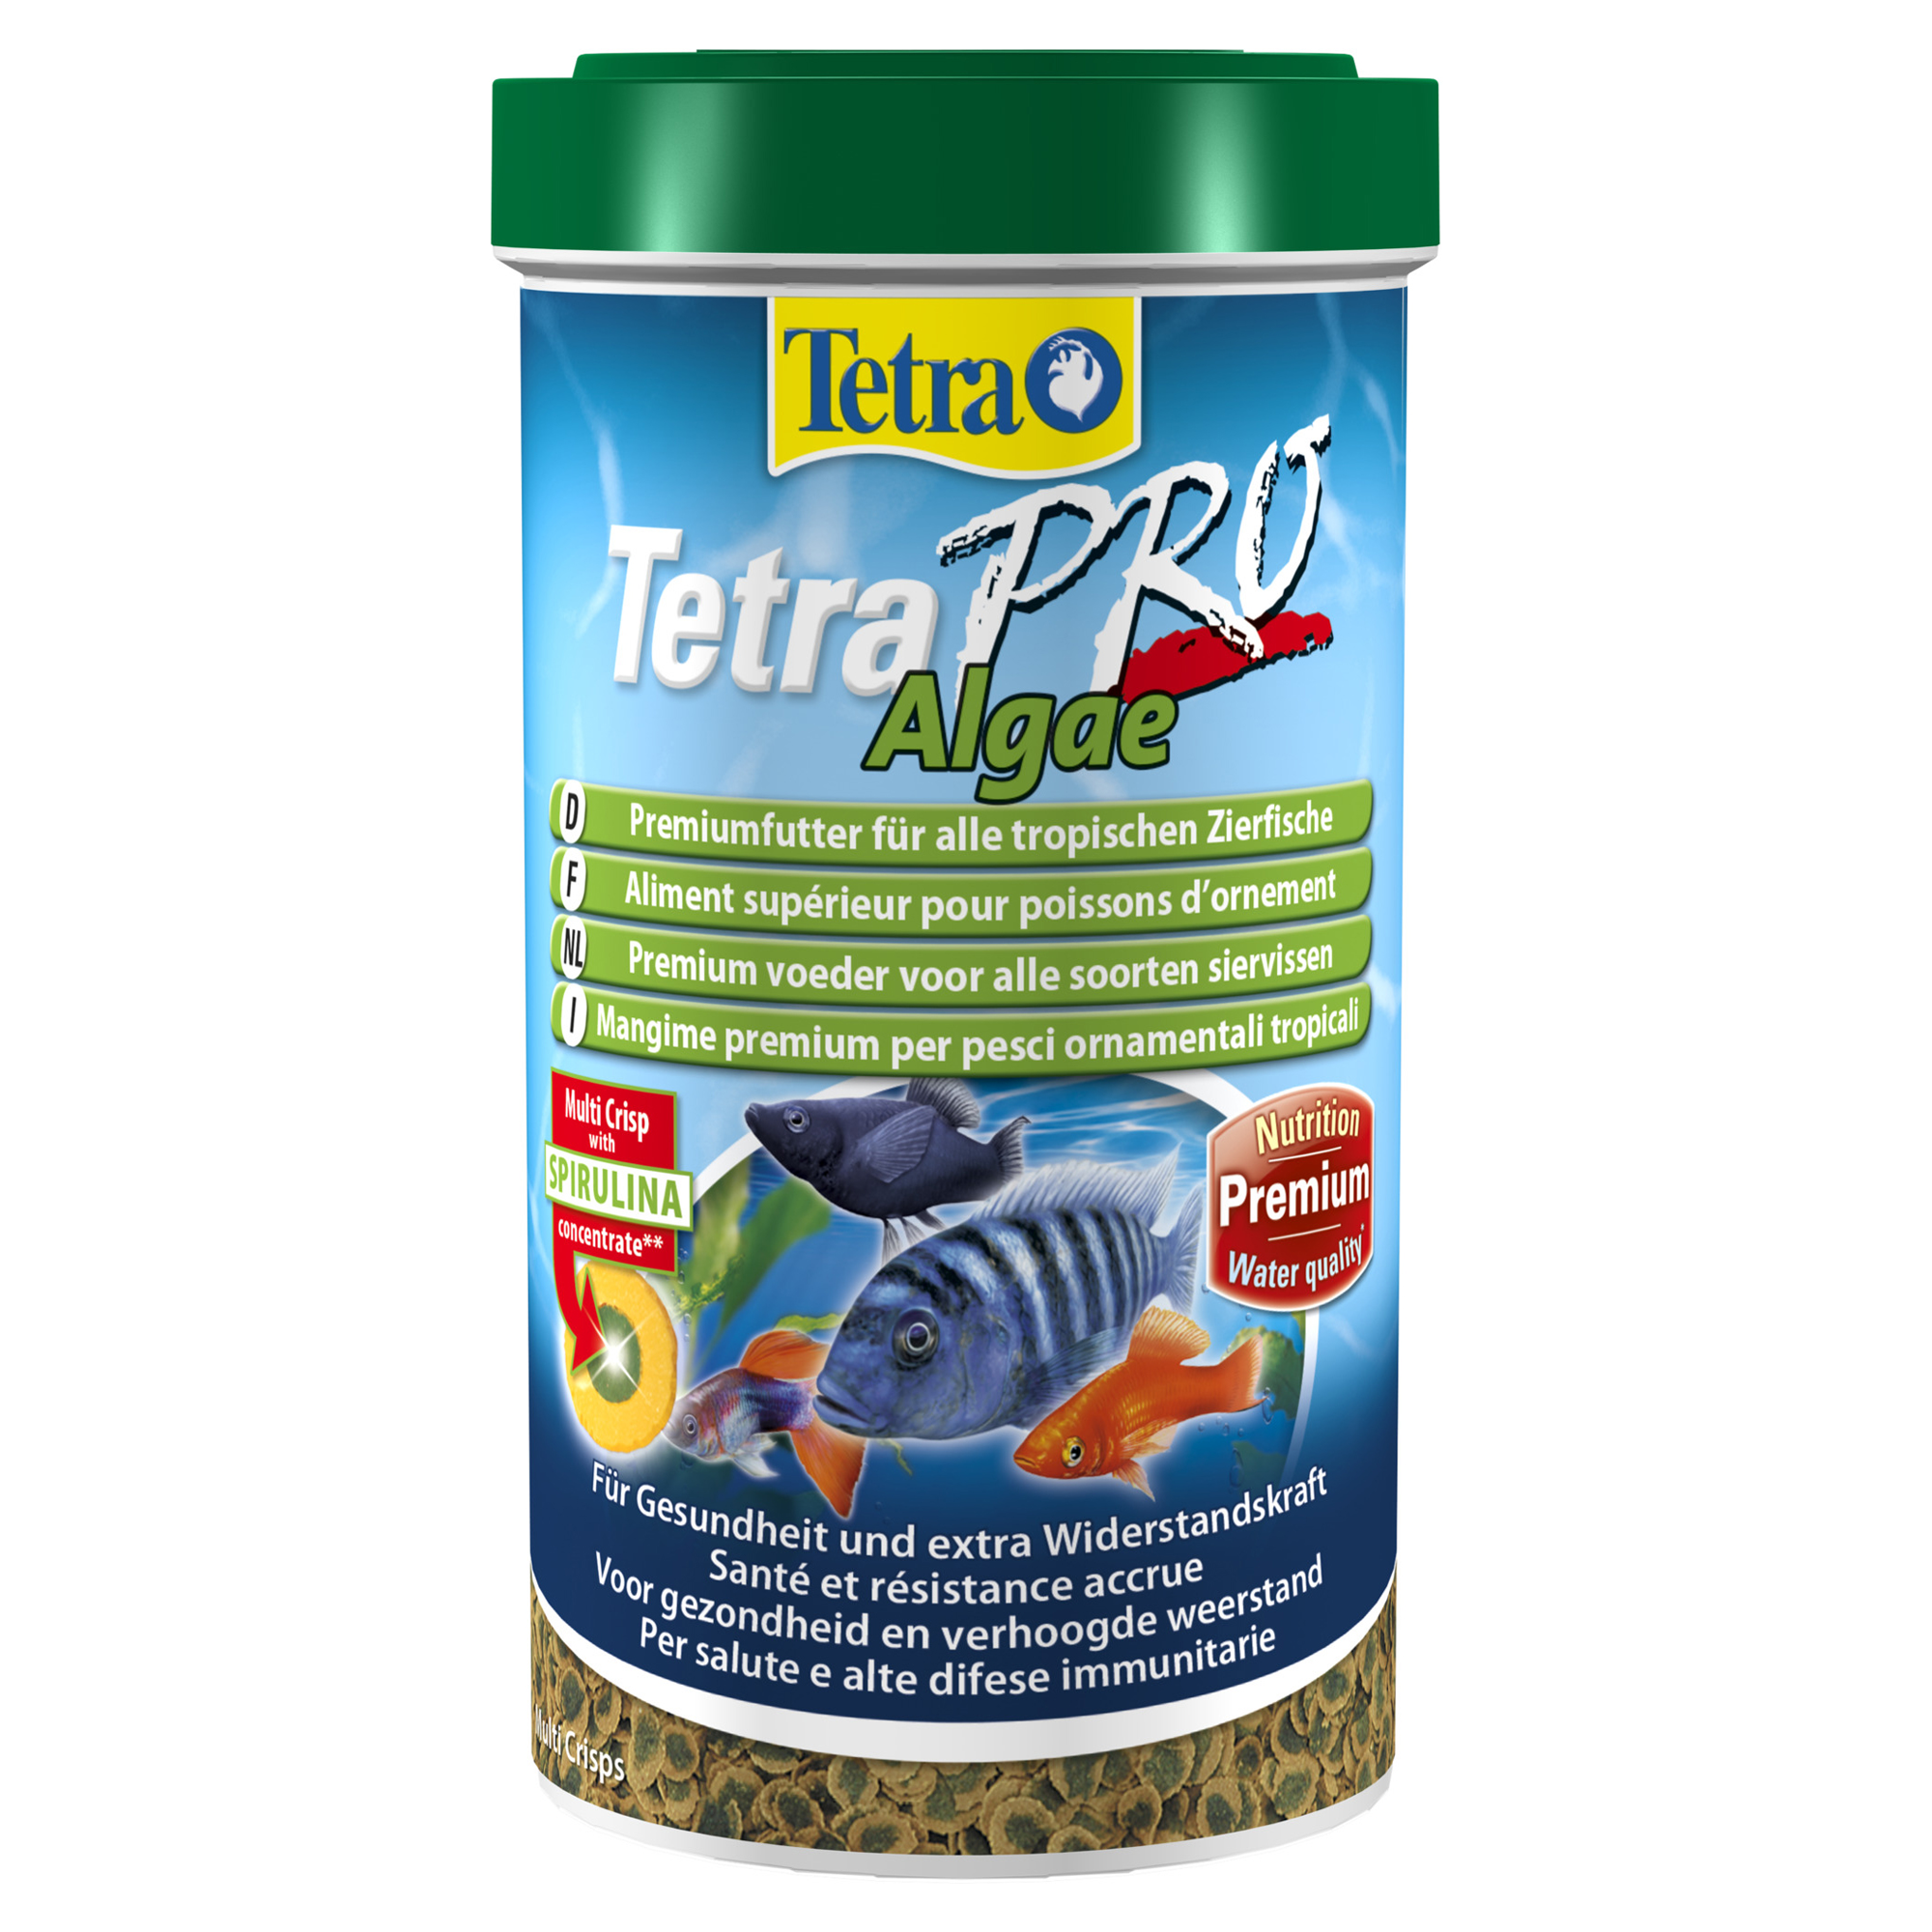 Fischfutter "Pro" Tetra Algae 95 g + product picture